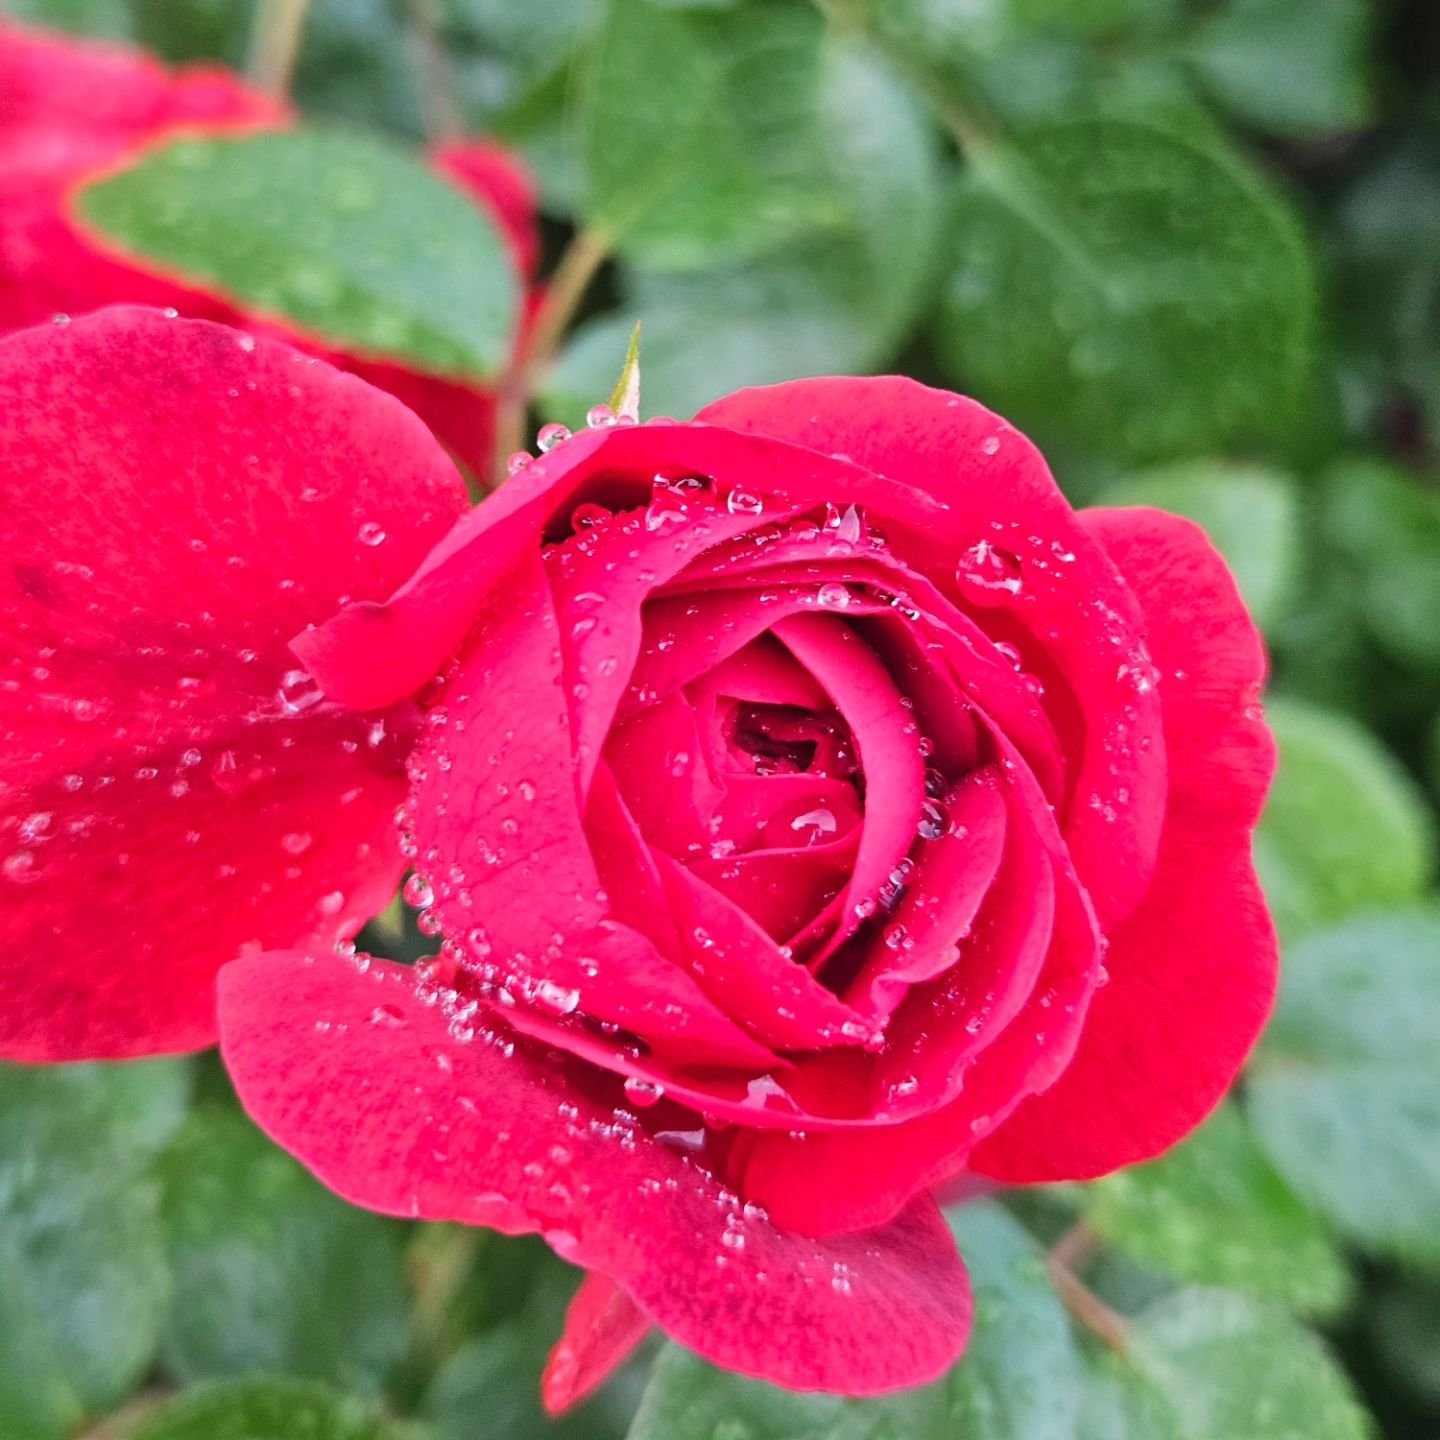 🌹Admiring the rain drops on the roses in front of the studio. We are open 12-7 today &amp; taking walk-ins come see us!

#roses #raindrops #raindropsonroses #tattoo #piercing #cincinnatitattoo